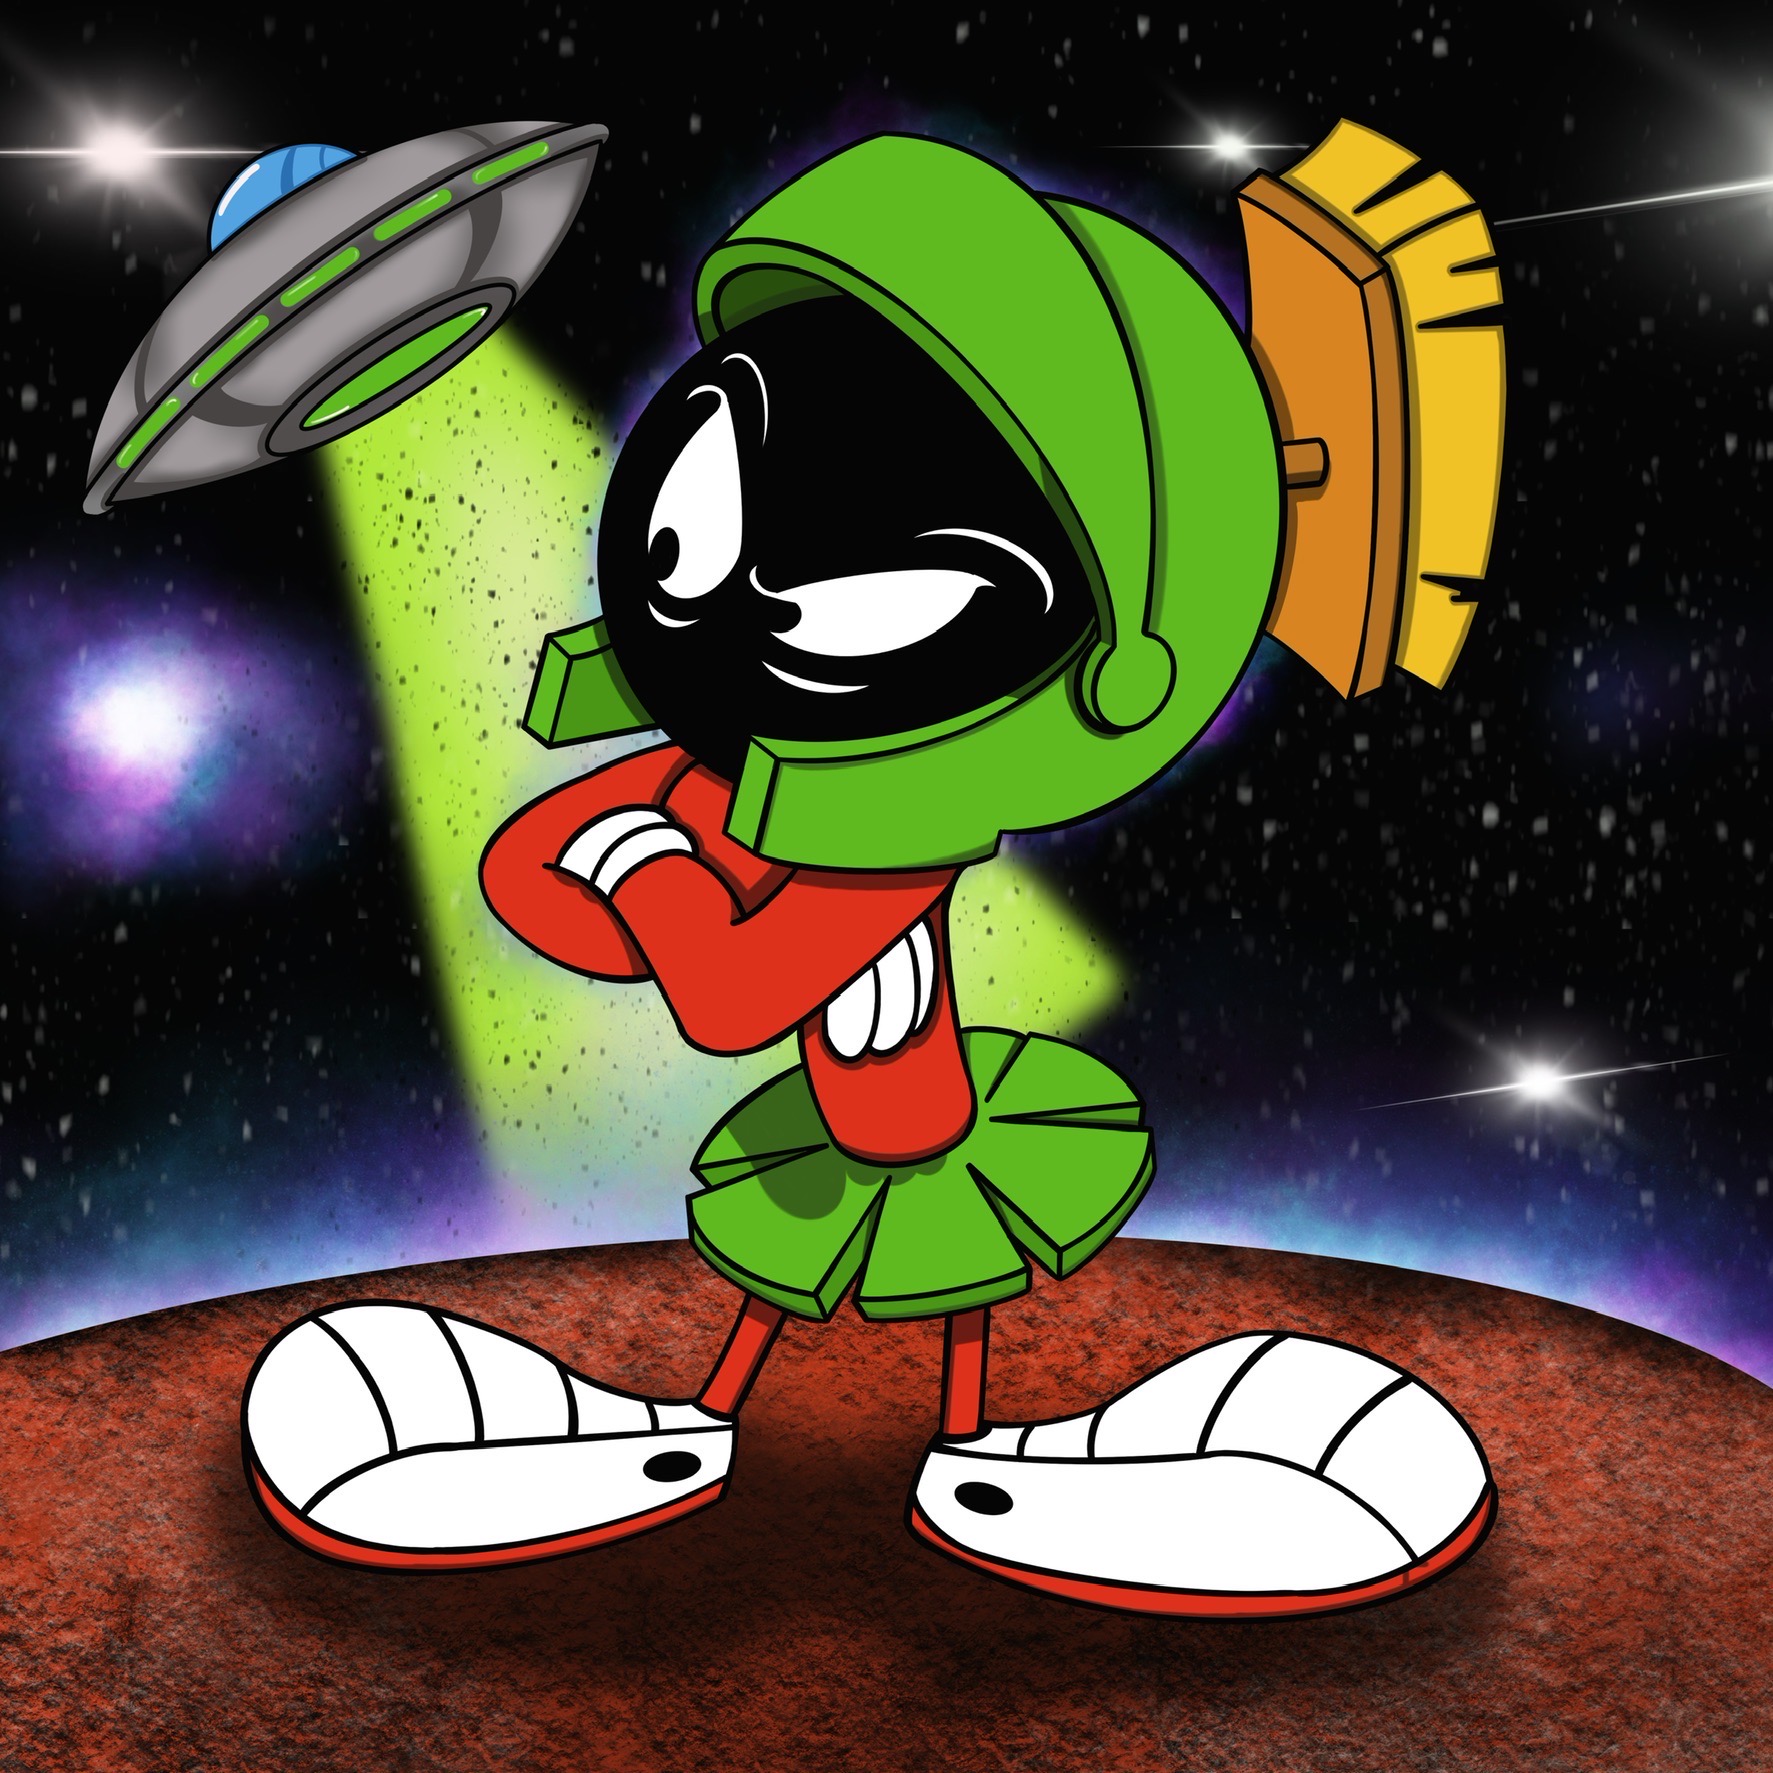 Marvin The Martian drawing by PixelTimeMachine on DeviantArt